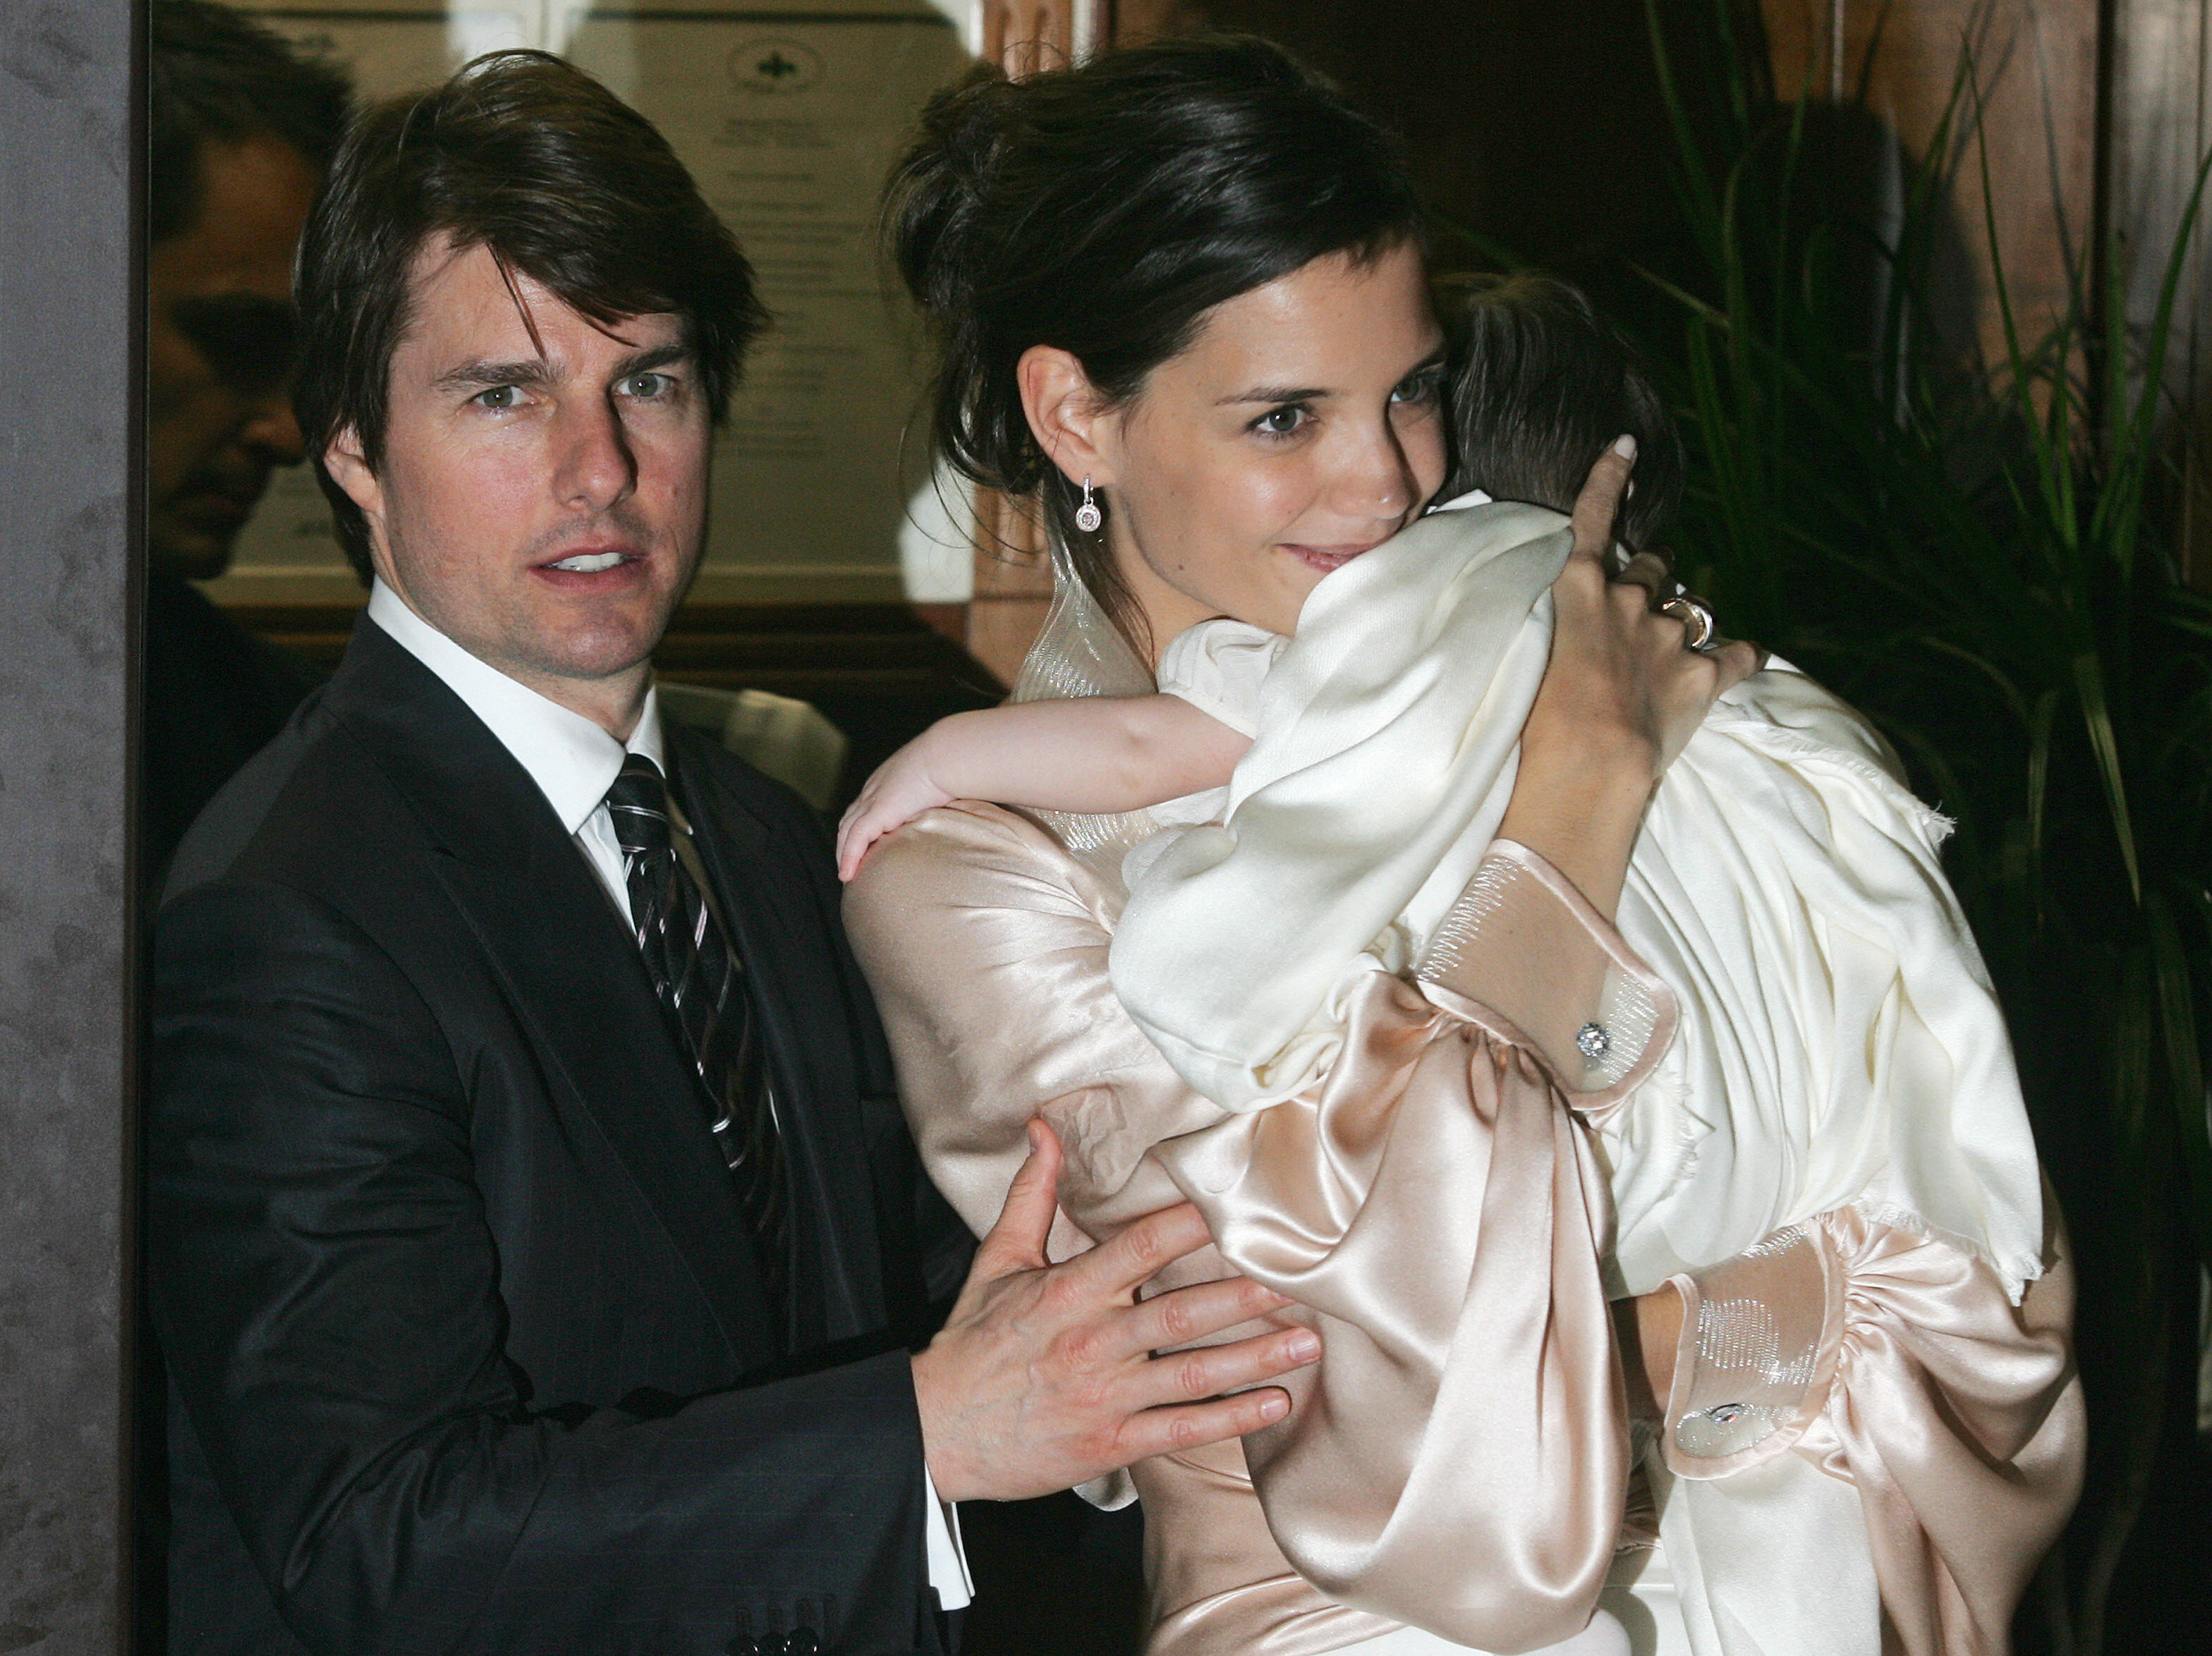 Tom Cruise, Katie Holmes, and Suri Cruise in central Rome, early 17 November 2006 | Source: Getty Images